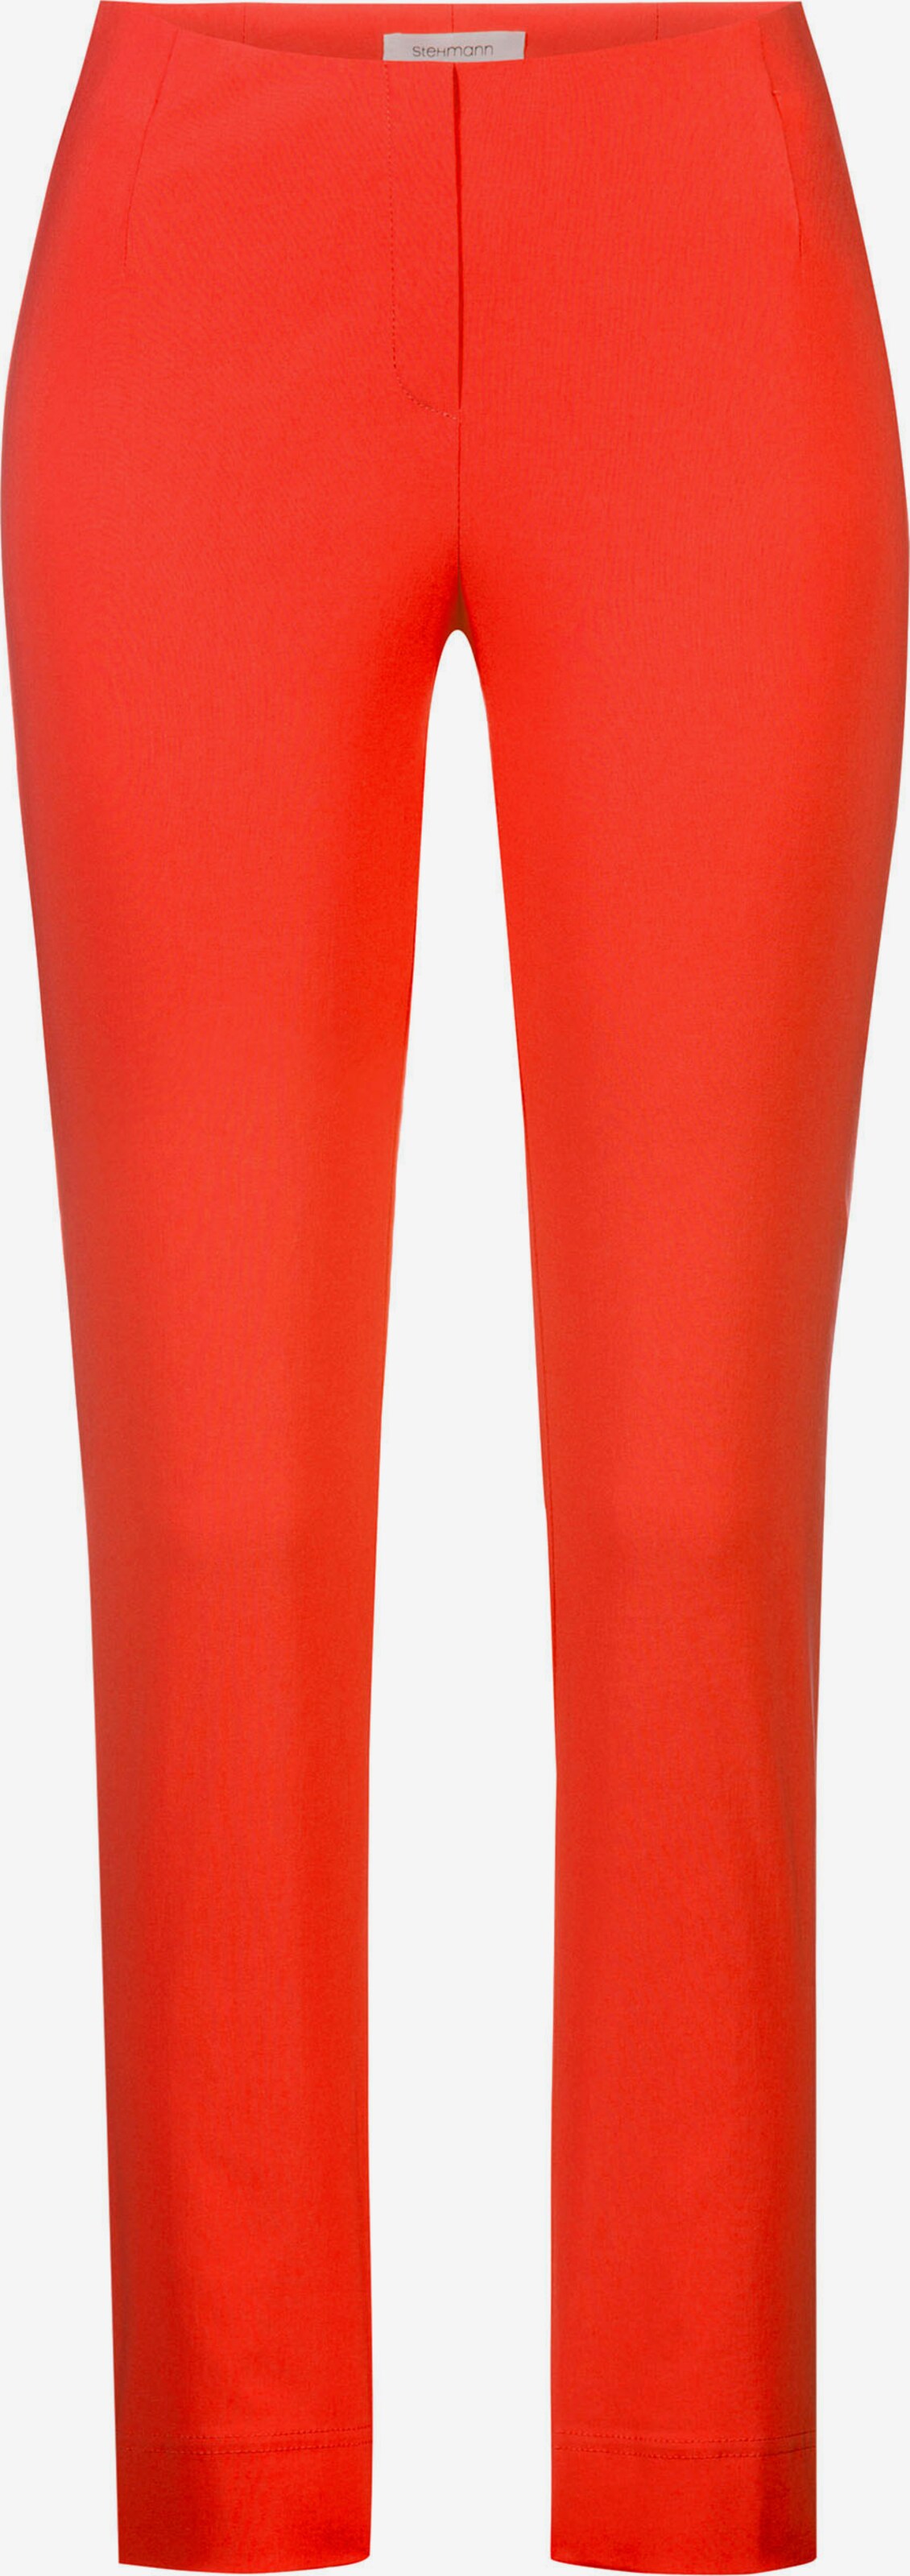 STEHMANN Slimfit Hose 'Ina' in Orangerot | ABOUT YOU